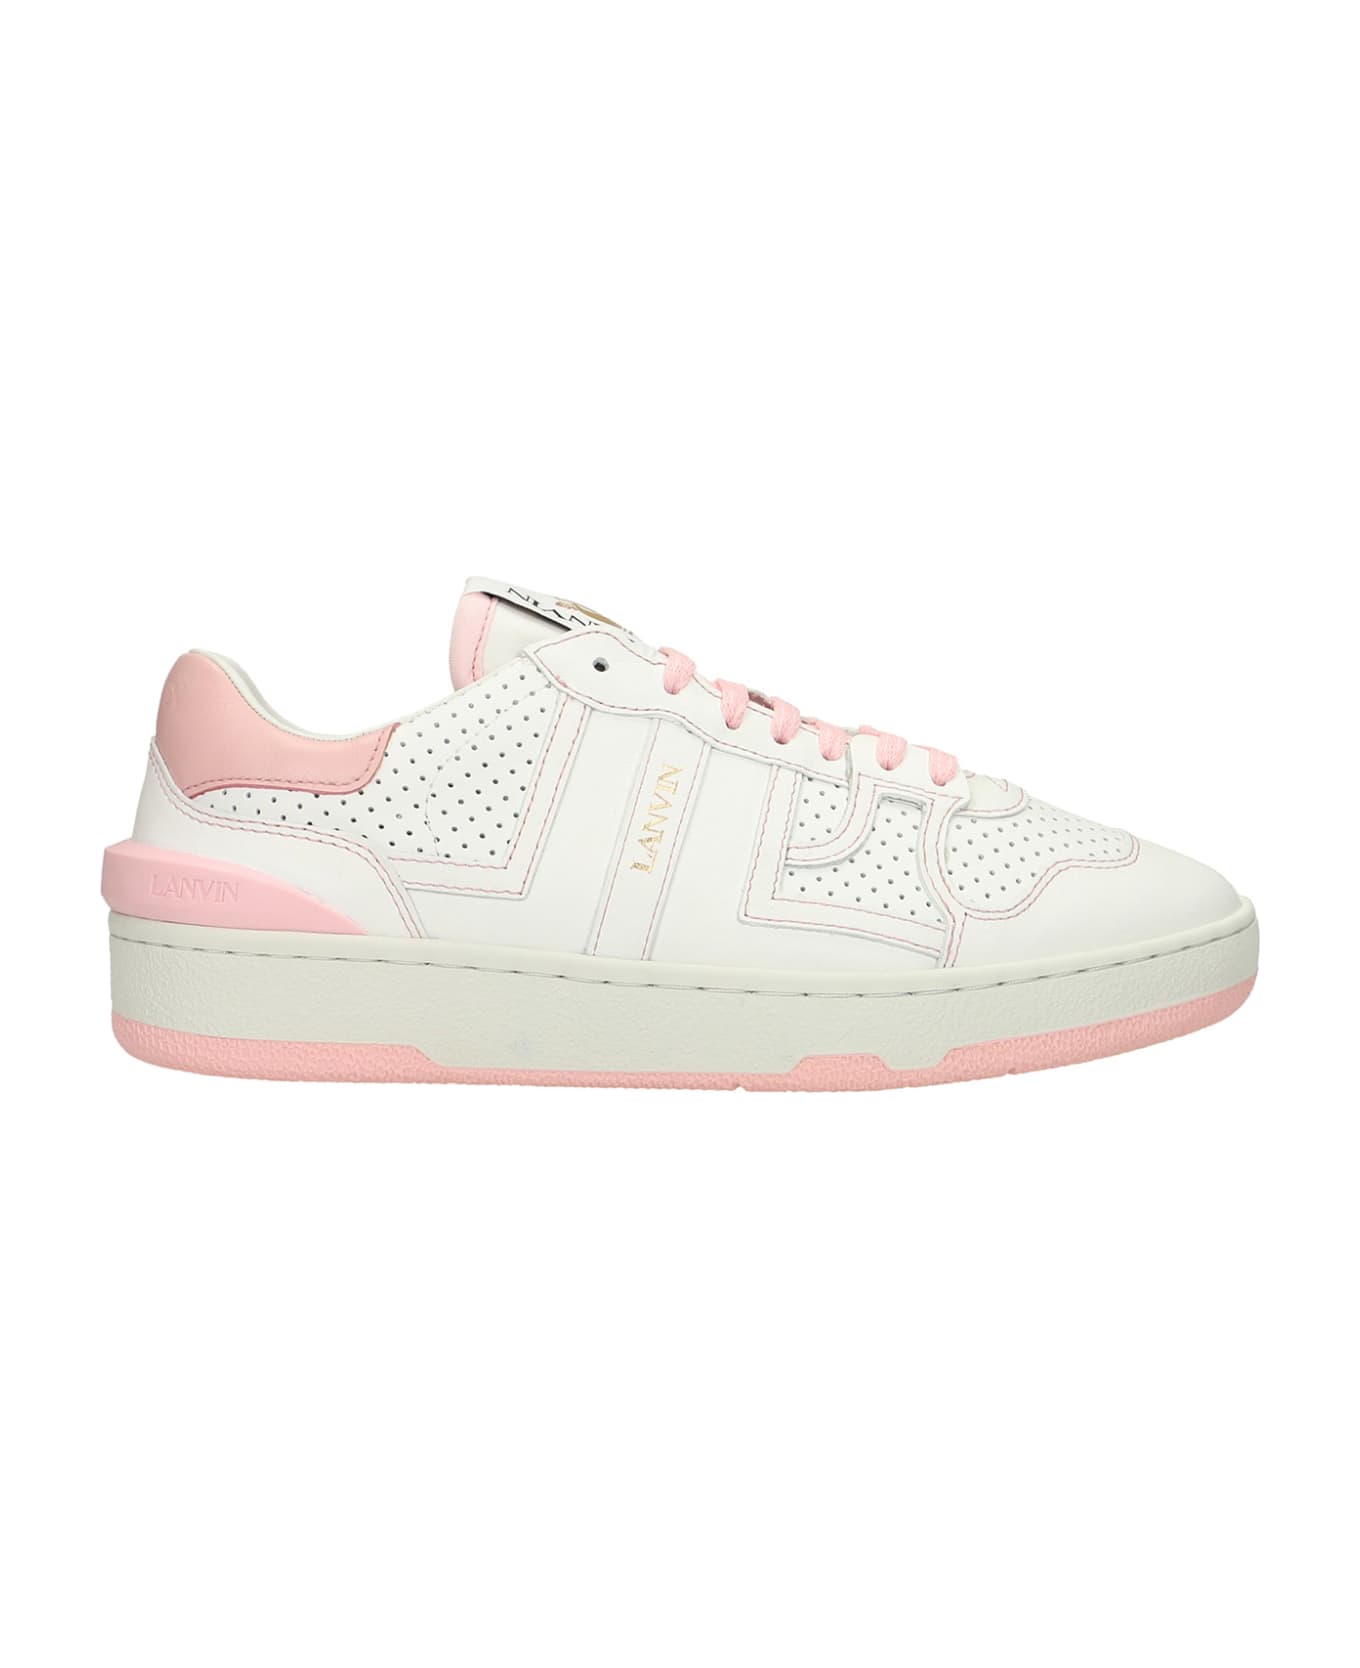 Lanvin Clay  Sneakers In White Leather - white